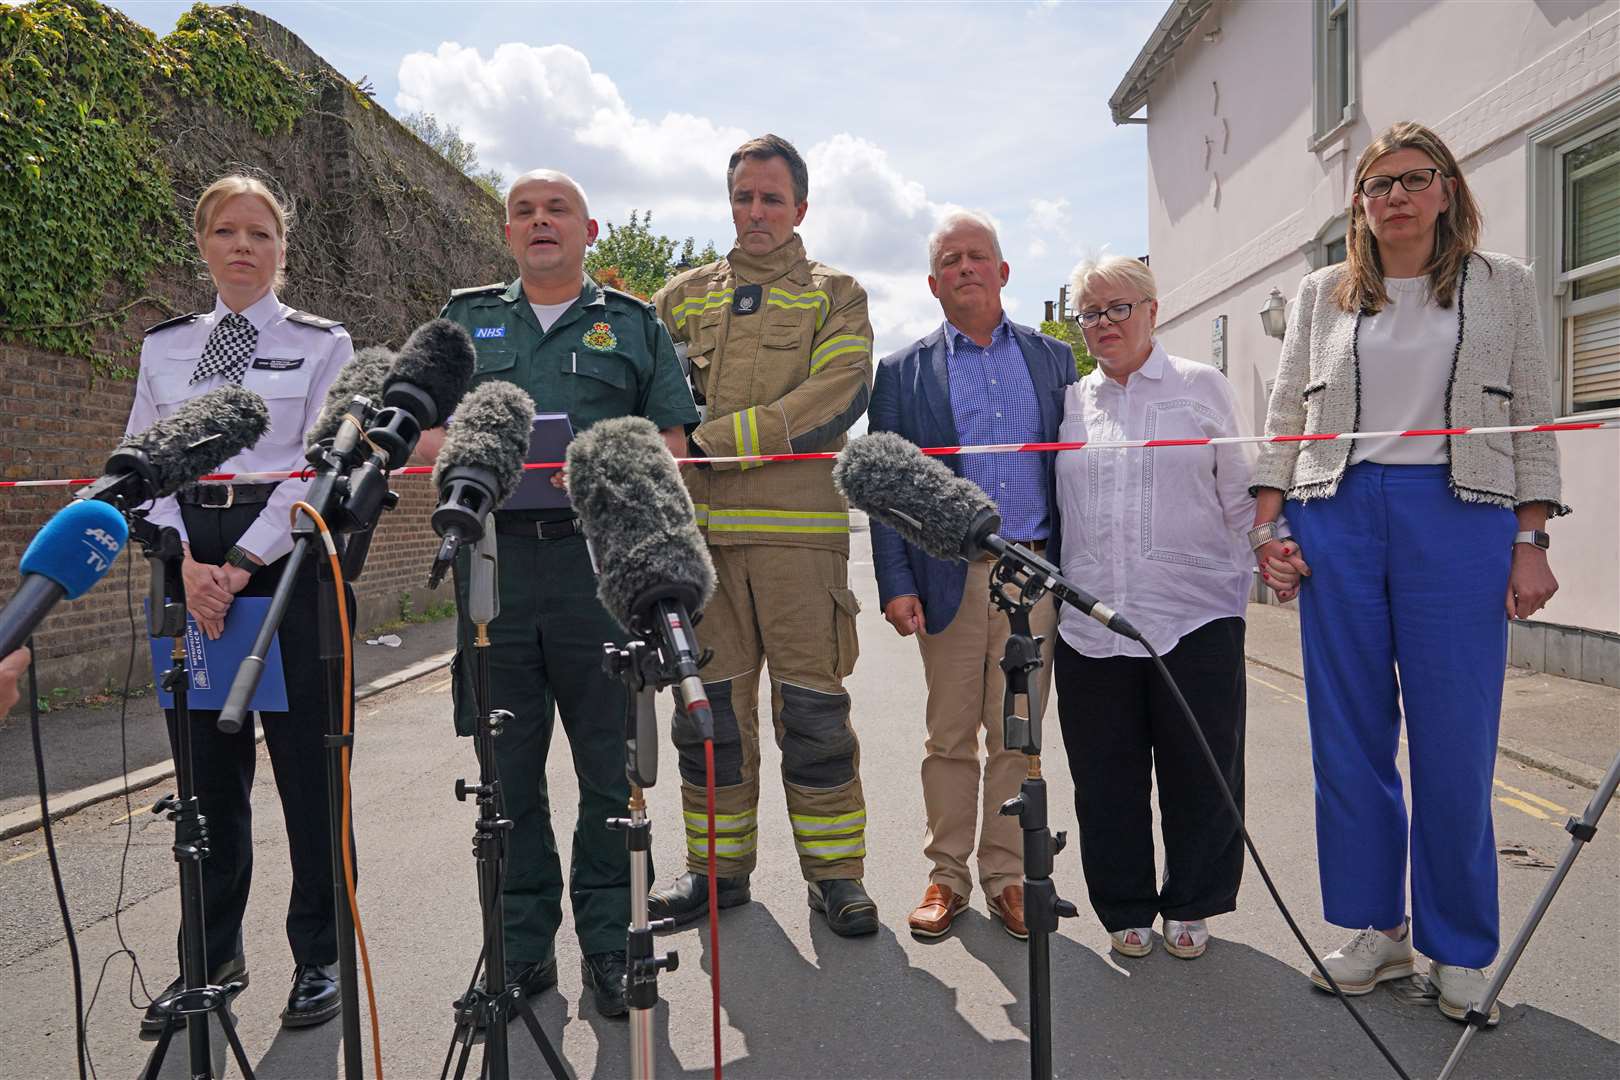 Metropolitan Police Detective Chief Superintendent Clair Kelland, left to right, Chief Paramedic Dr John Martin from the London Ambulance Service, Andrew Pennick, London Fire Brigade, and school governor John Tucker, speak to the media (Yui Mok/PA)